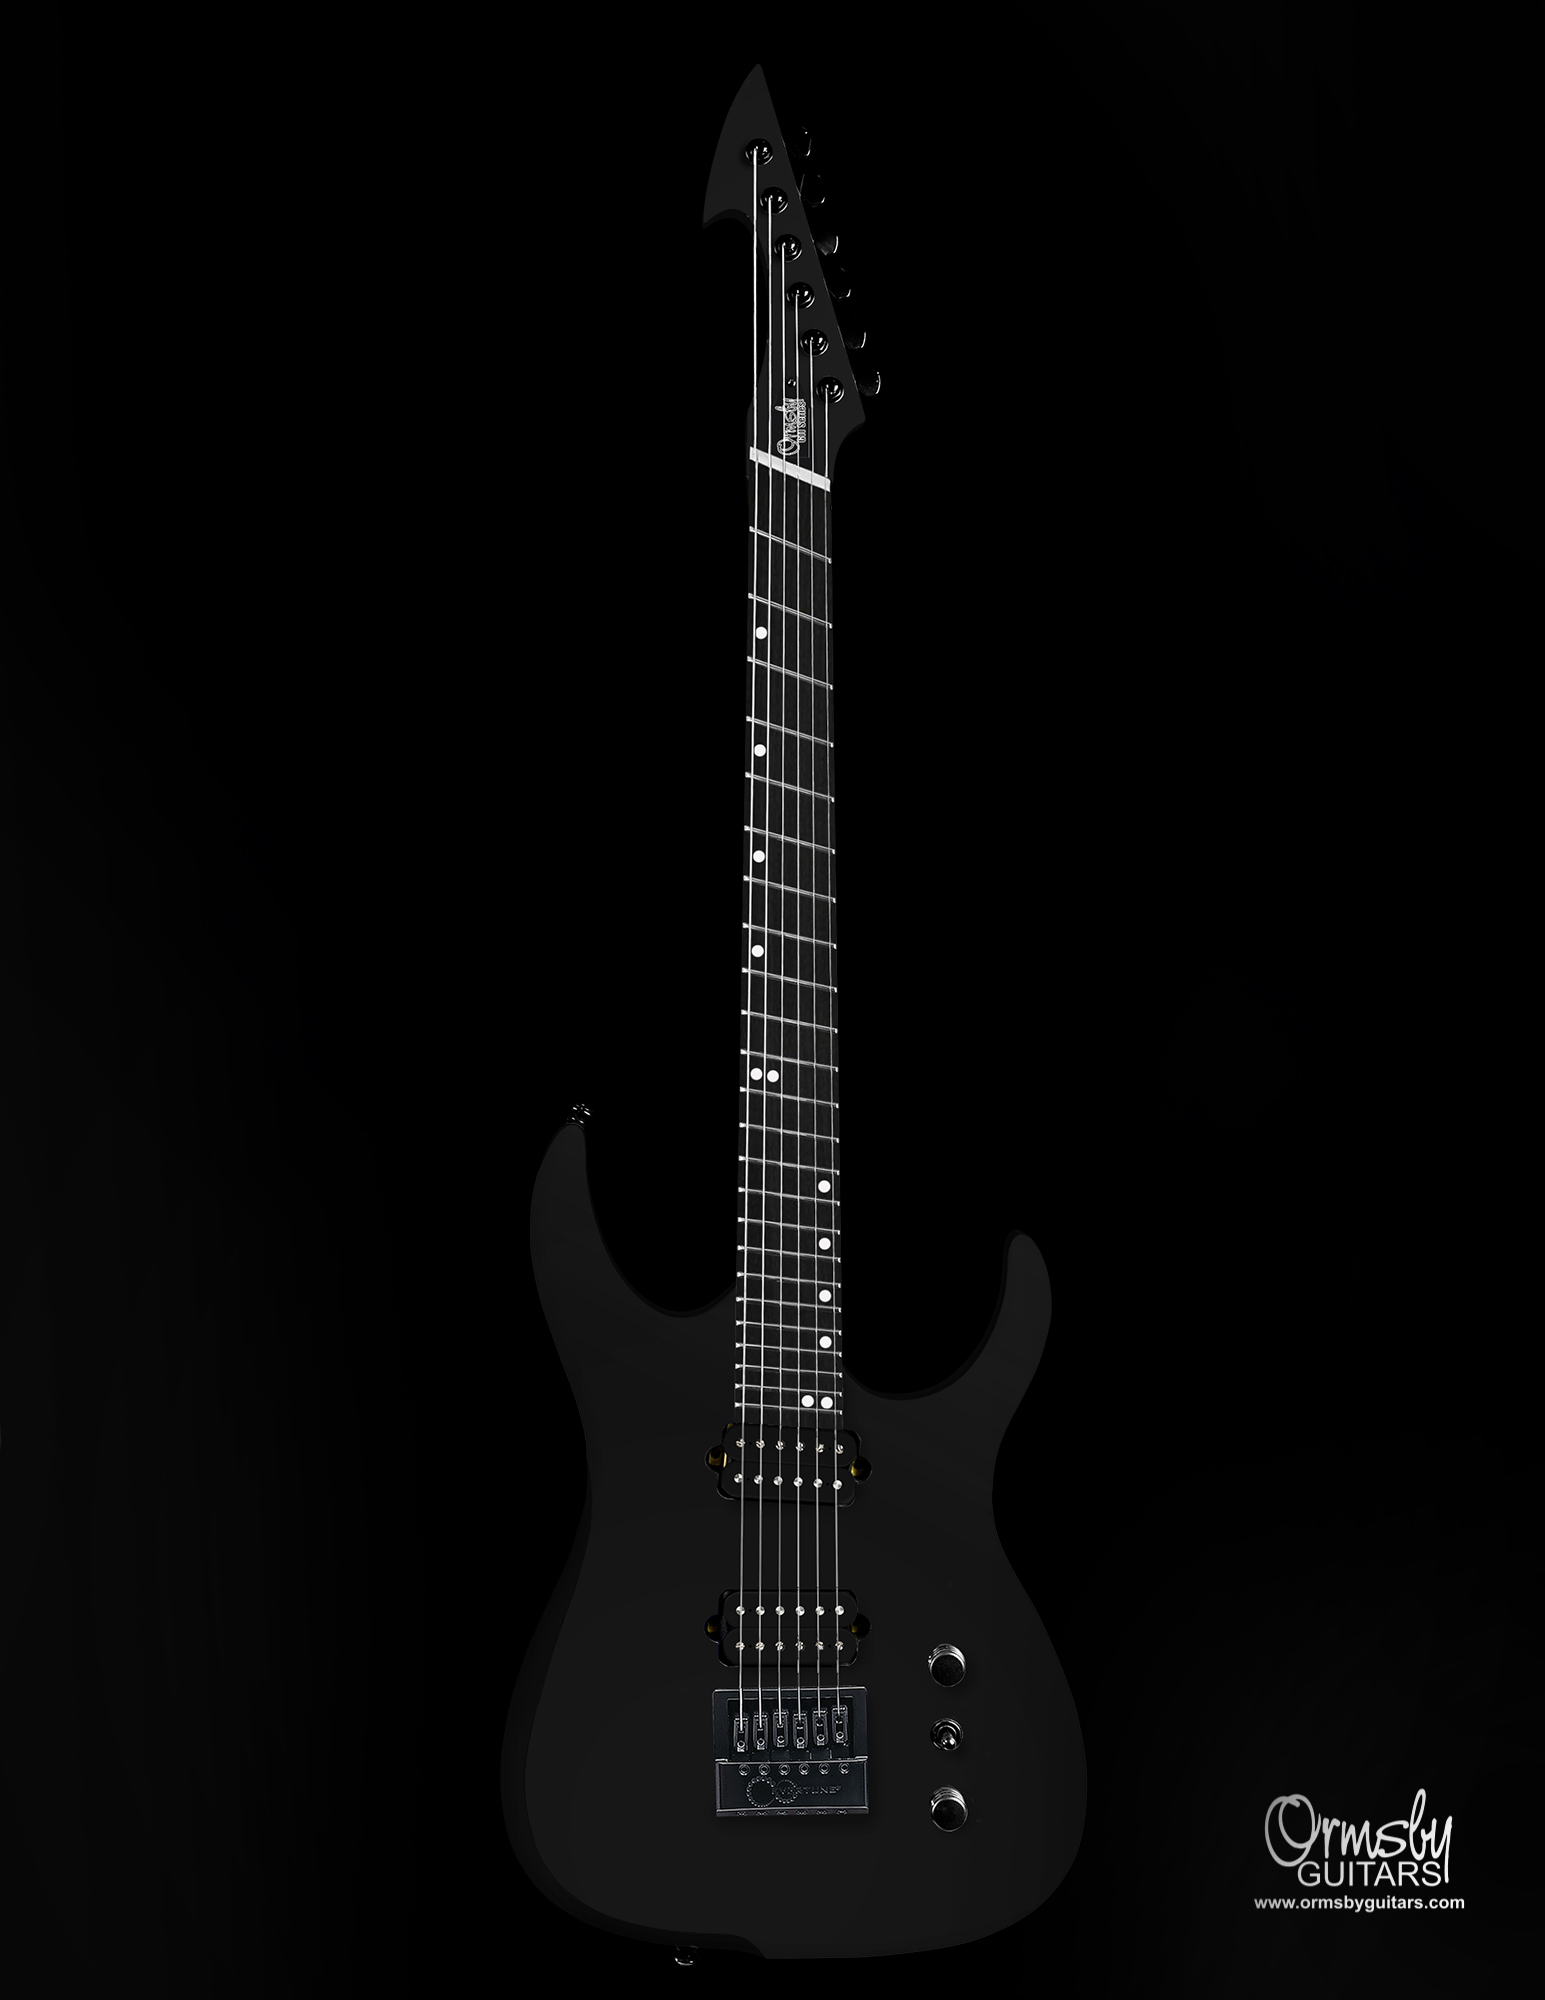 Ormsby Guitars GTI Hype